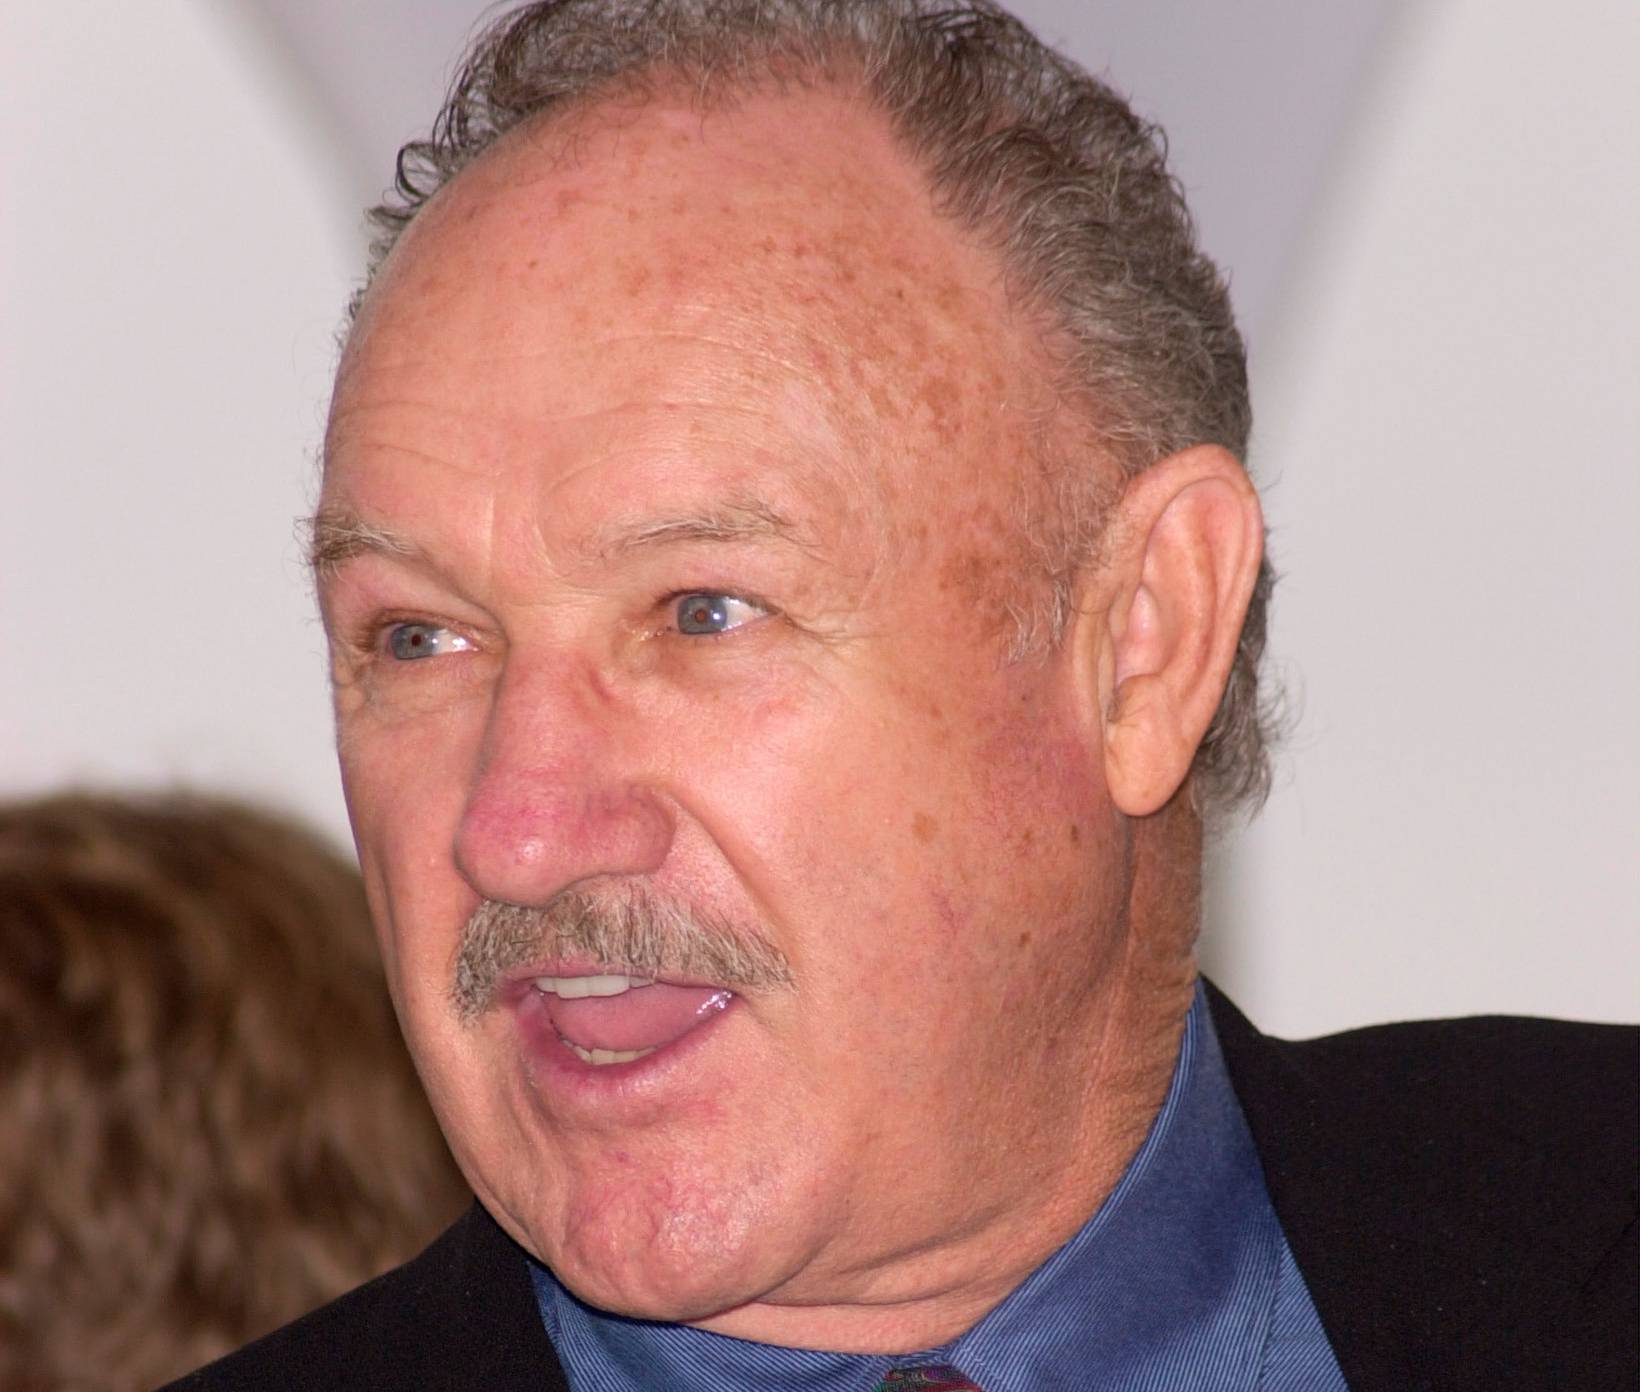 Gene Hackman Once Revealed He Didn't Know Where His Oscars Were